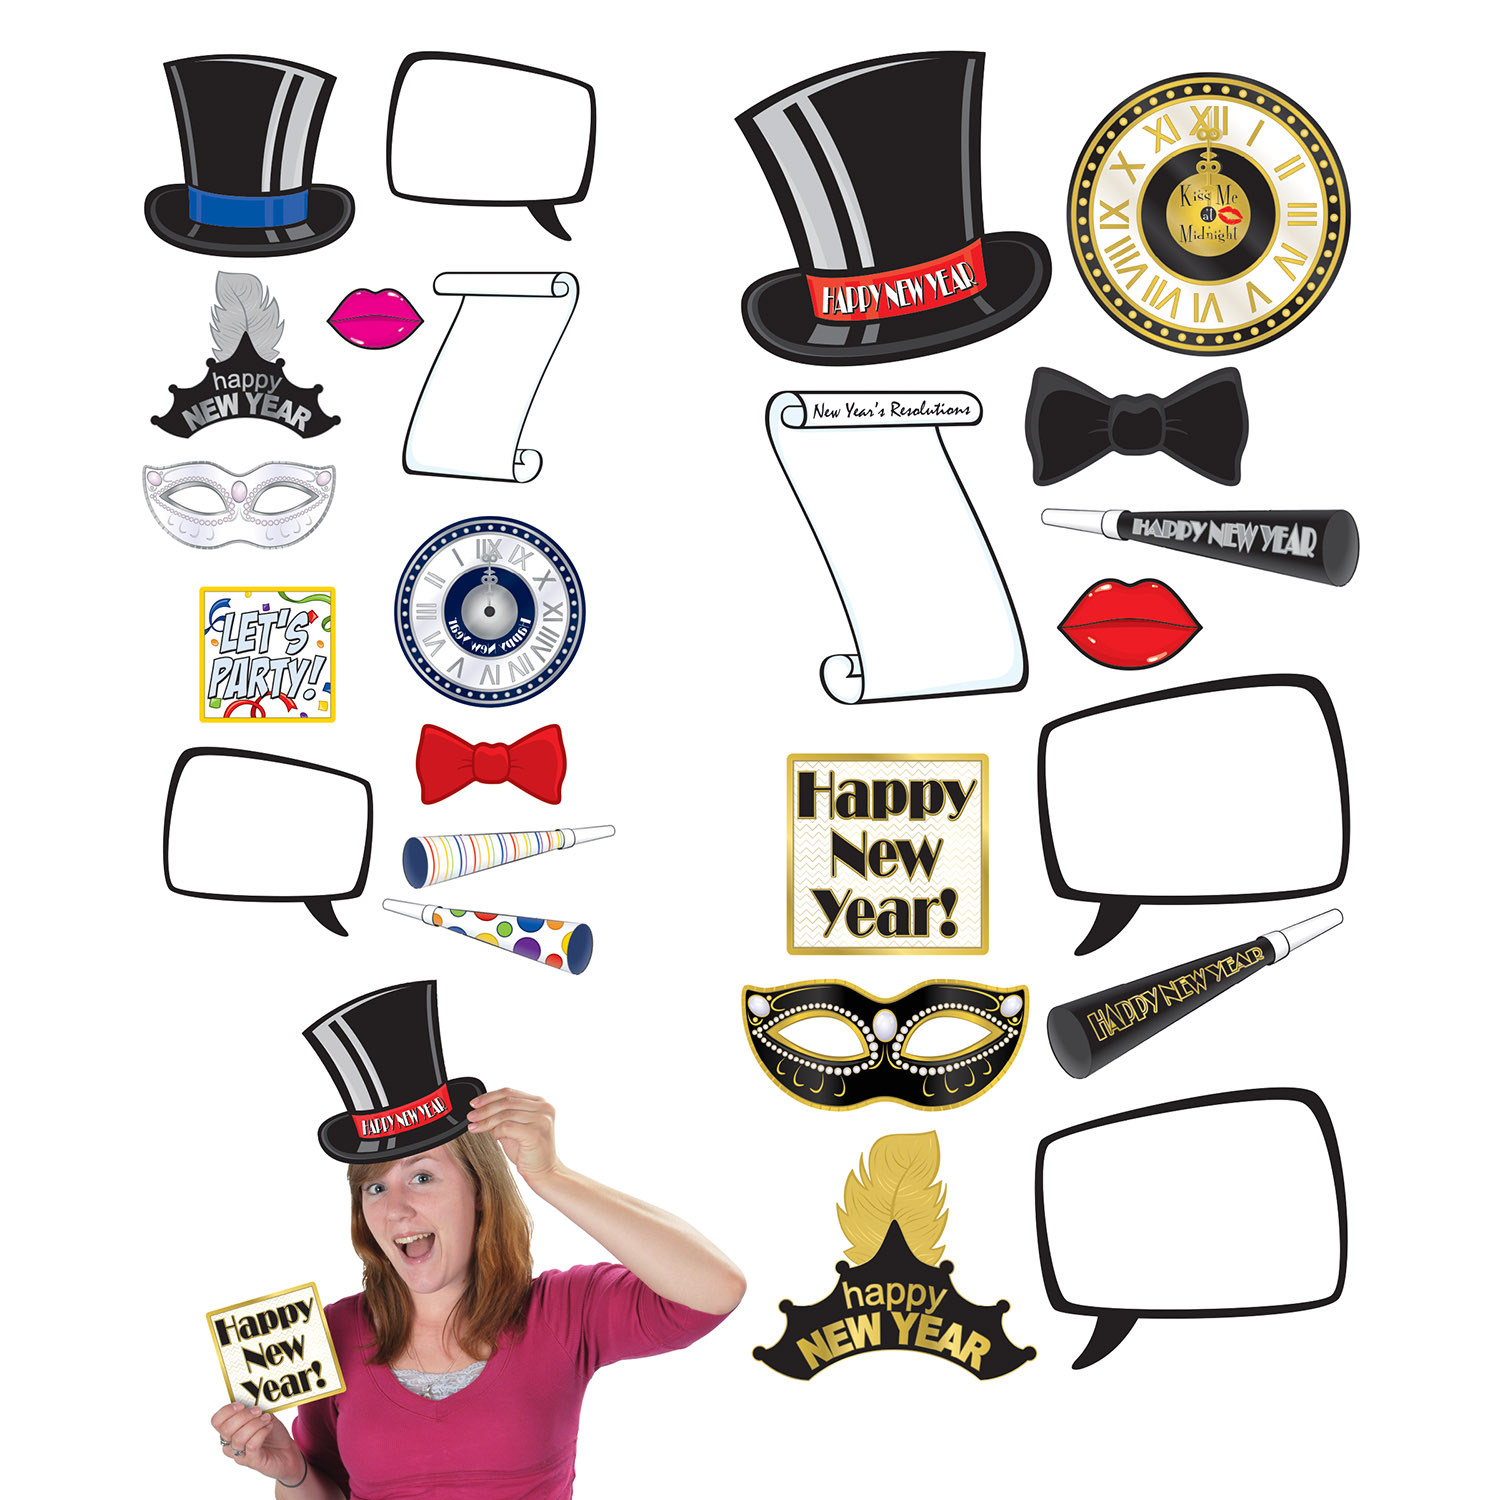 Card stock cutouts such as scrolls, top hats, bows, tiaras and so much more.